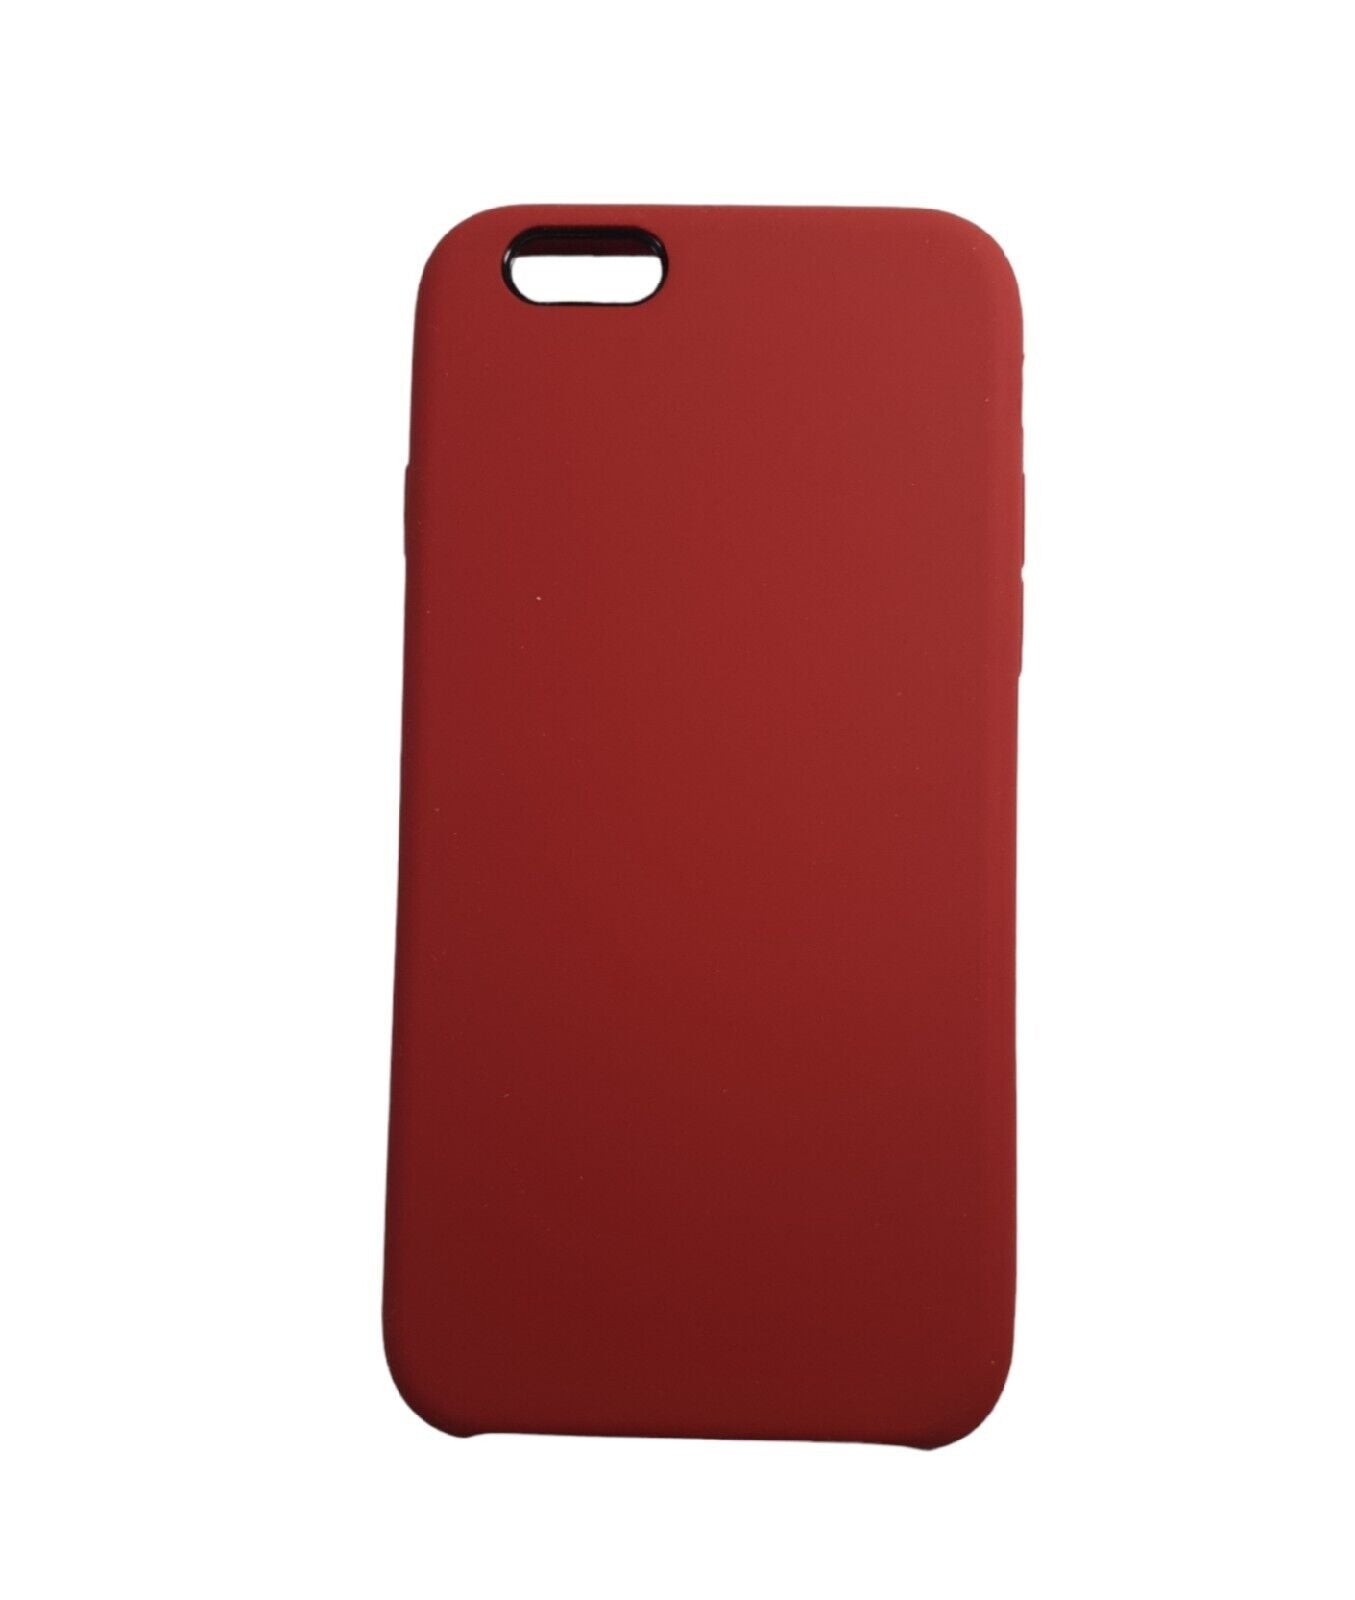 Cases For iPhone 6S saynama